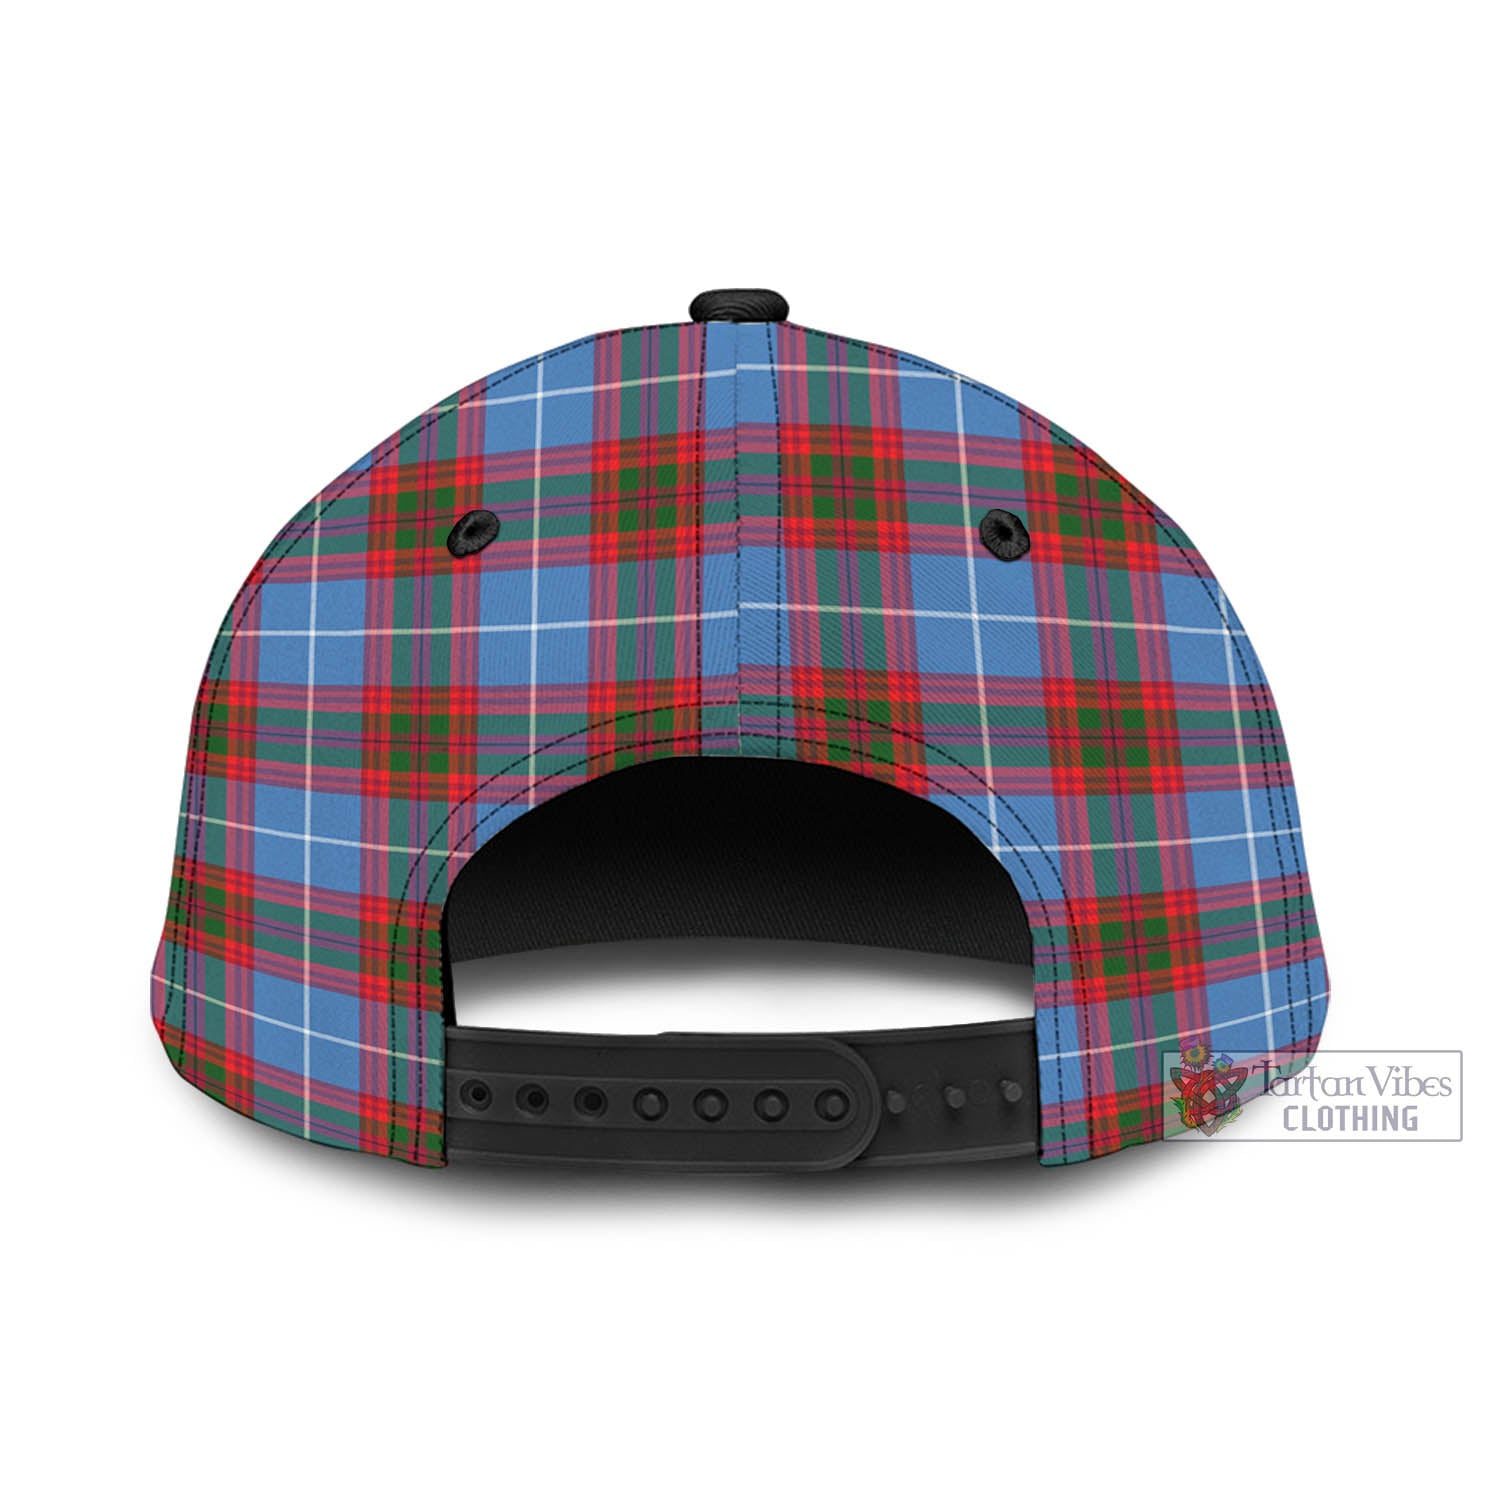 Tartan Vibes Clothing Congilton Tartan Classic Cap with Family Crest In Me Style